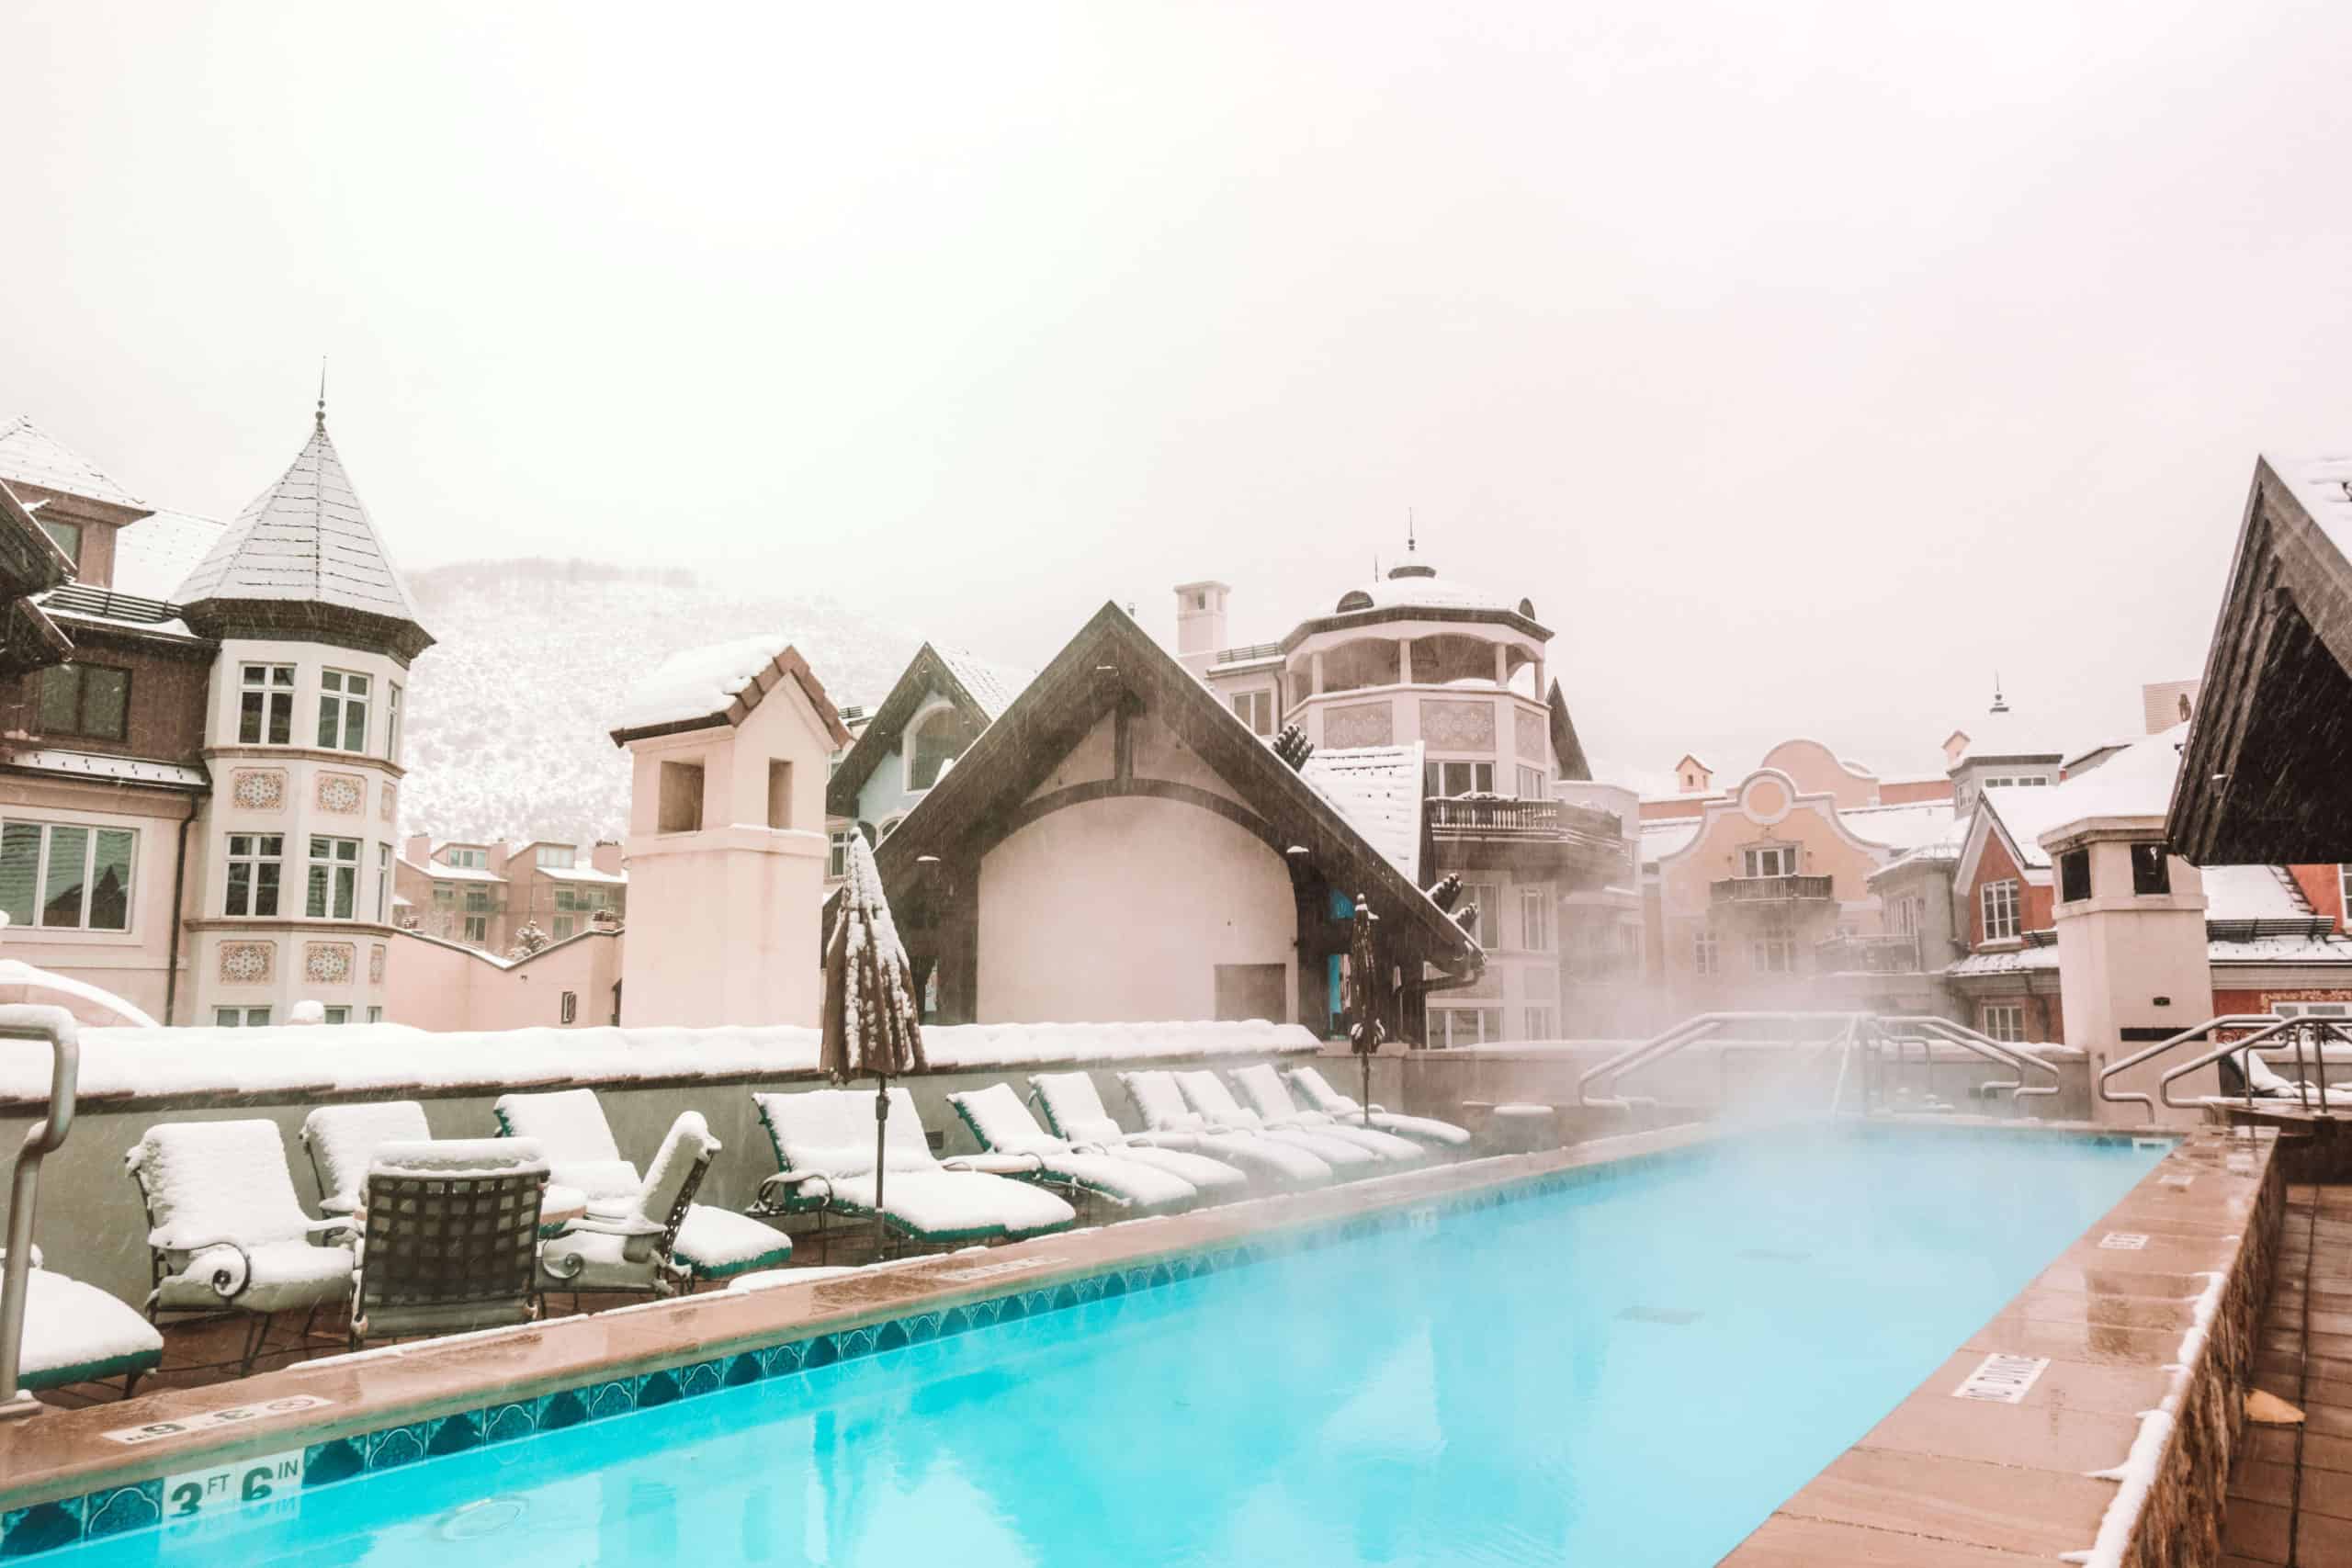 Heated pool at the Arabelle hotel | The Ultimate Guide to Vail, Colorado